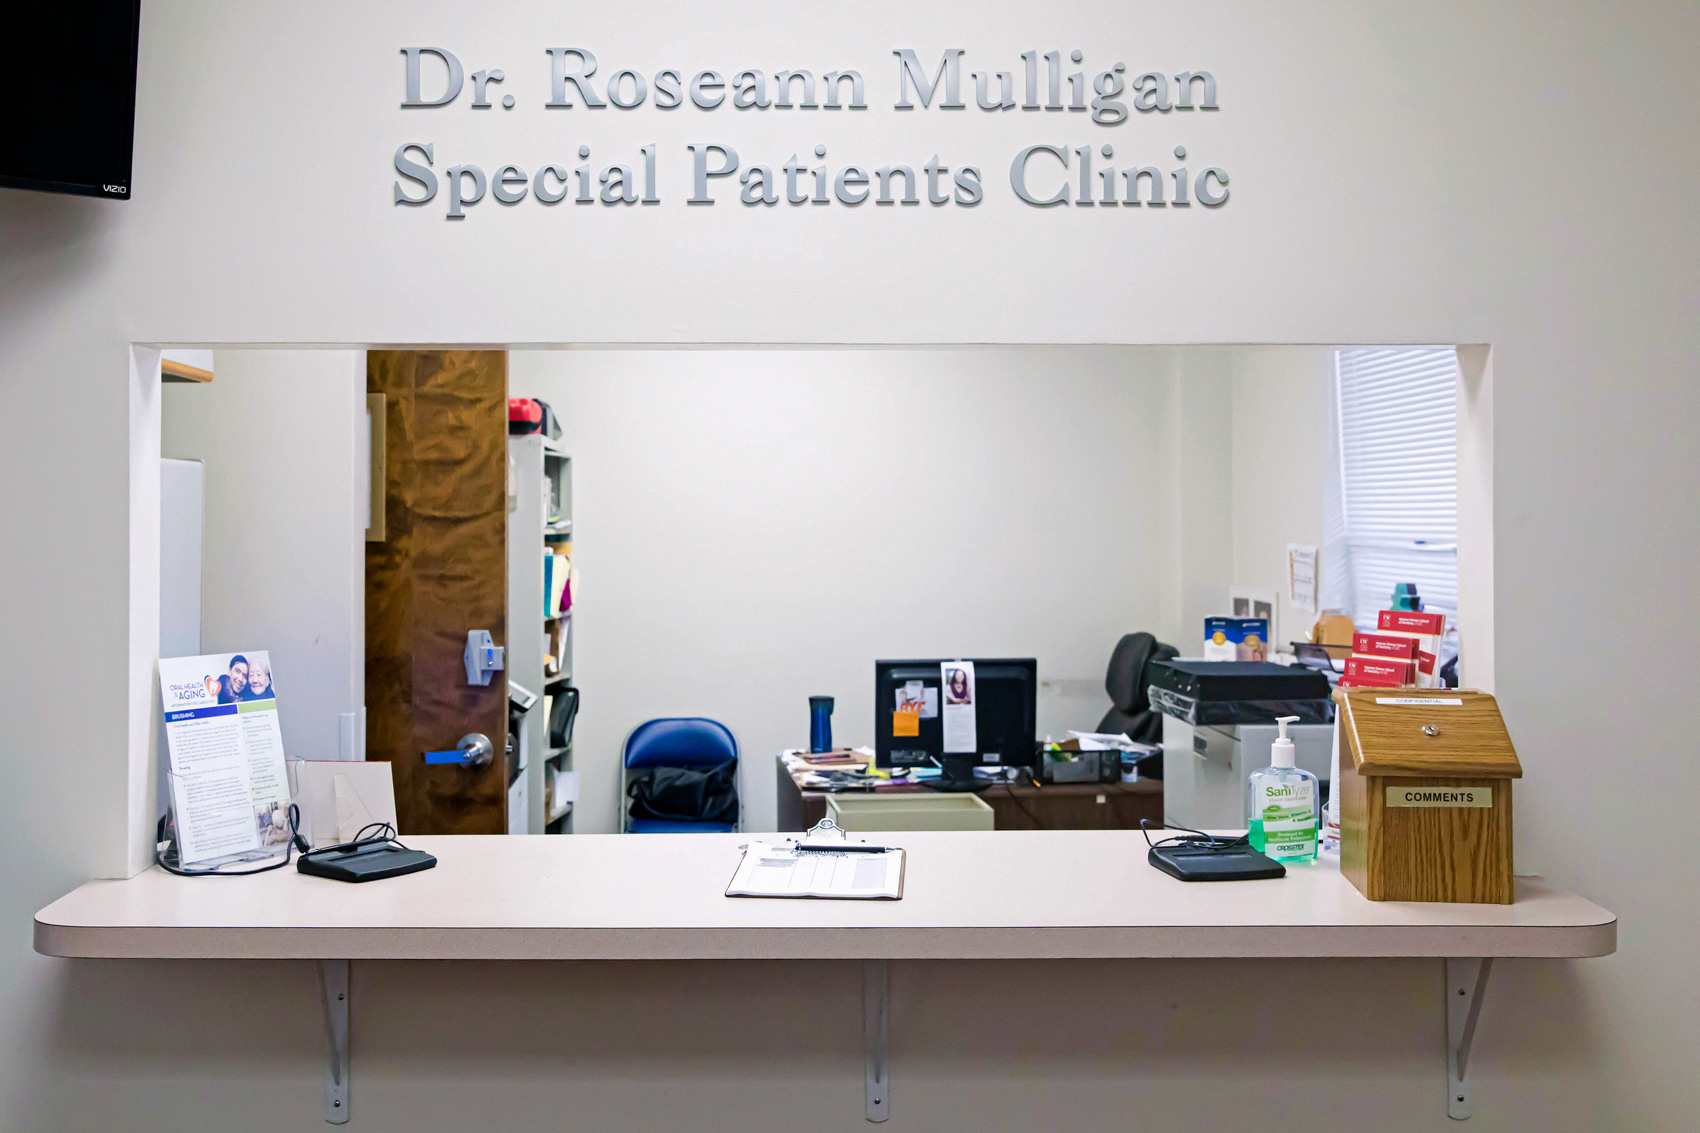 The Dr. Roseann Mulligan Special Patients Clinic provides treatment to patients who are developmentally delayed, physically disabled and frail elderly. | NATE JENSEN